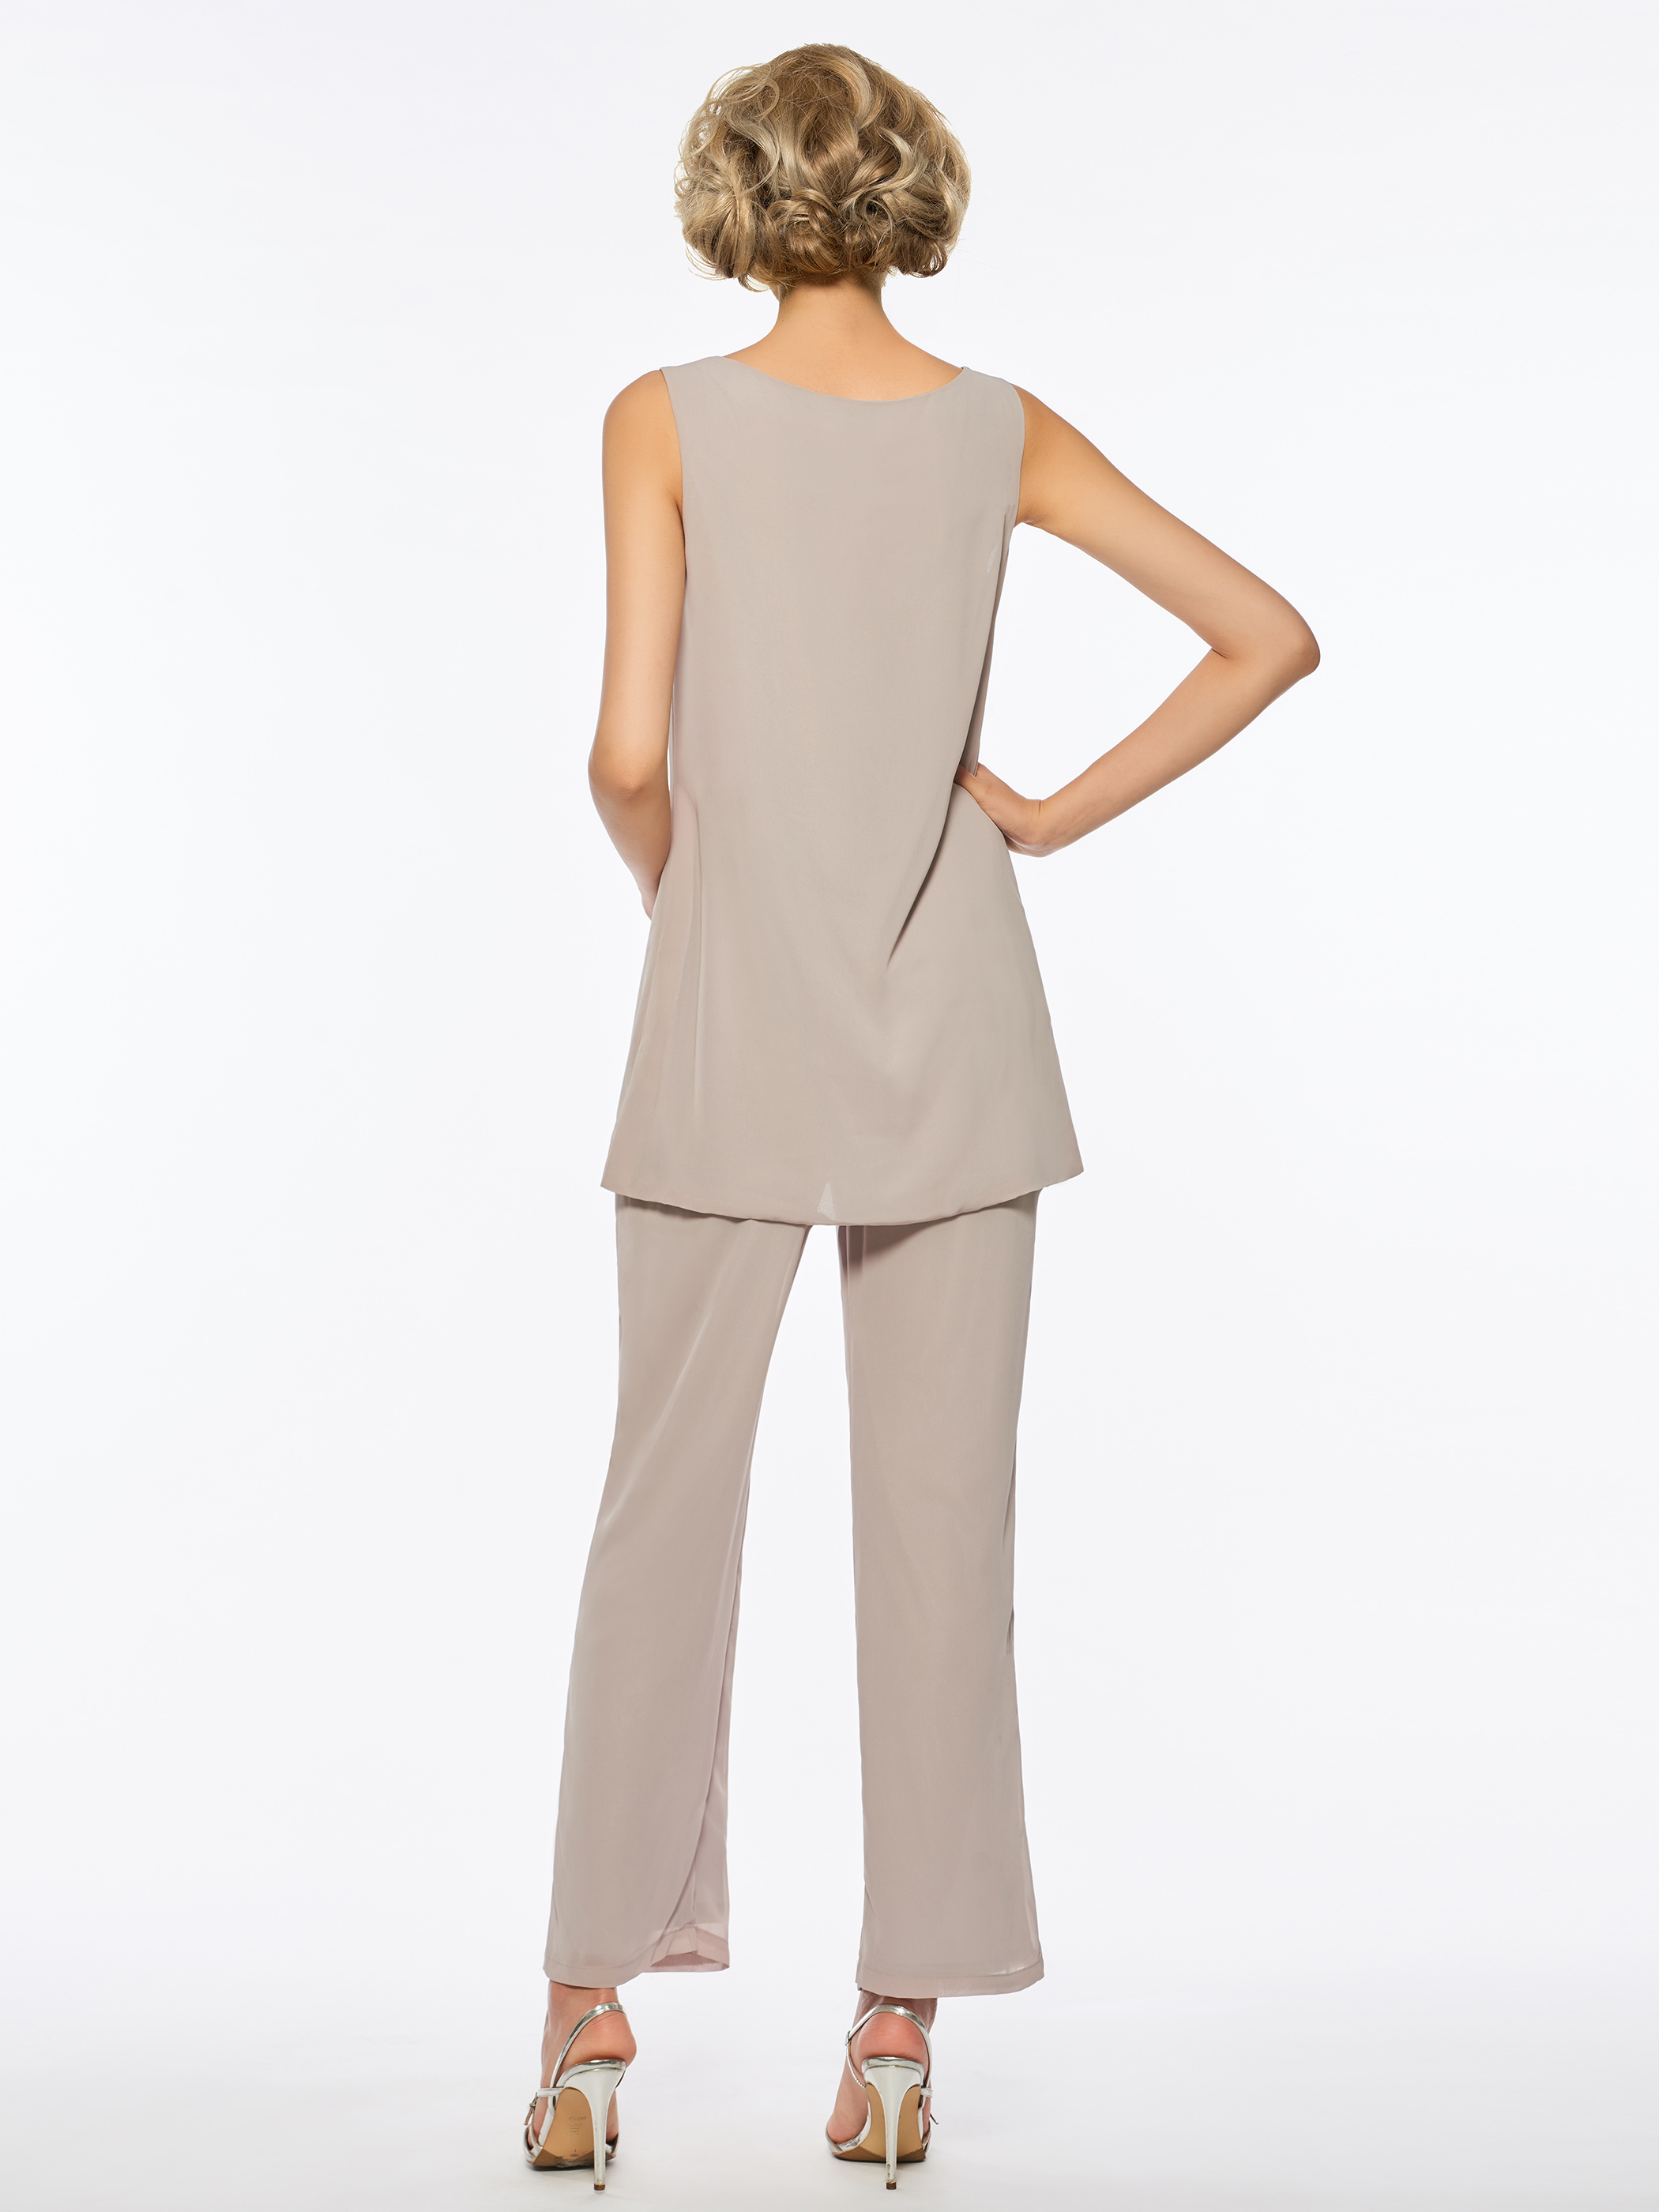 Loose 3 Pieces Mother of the Bride Pantsuits